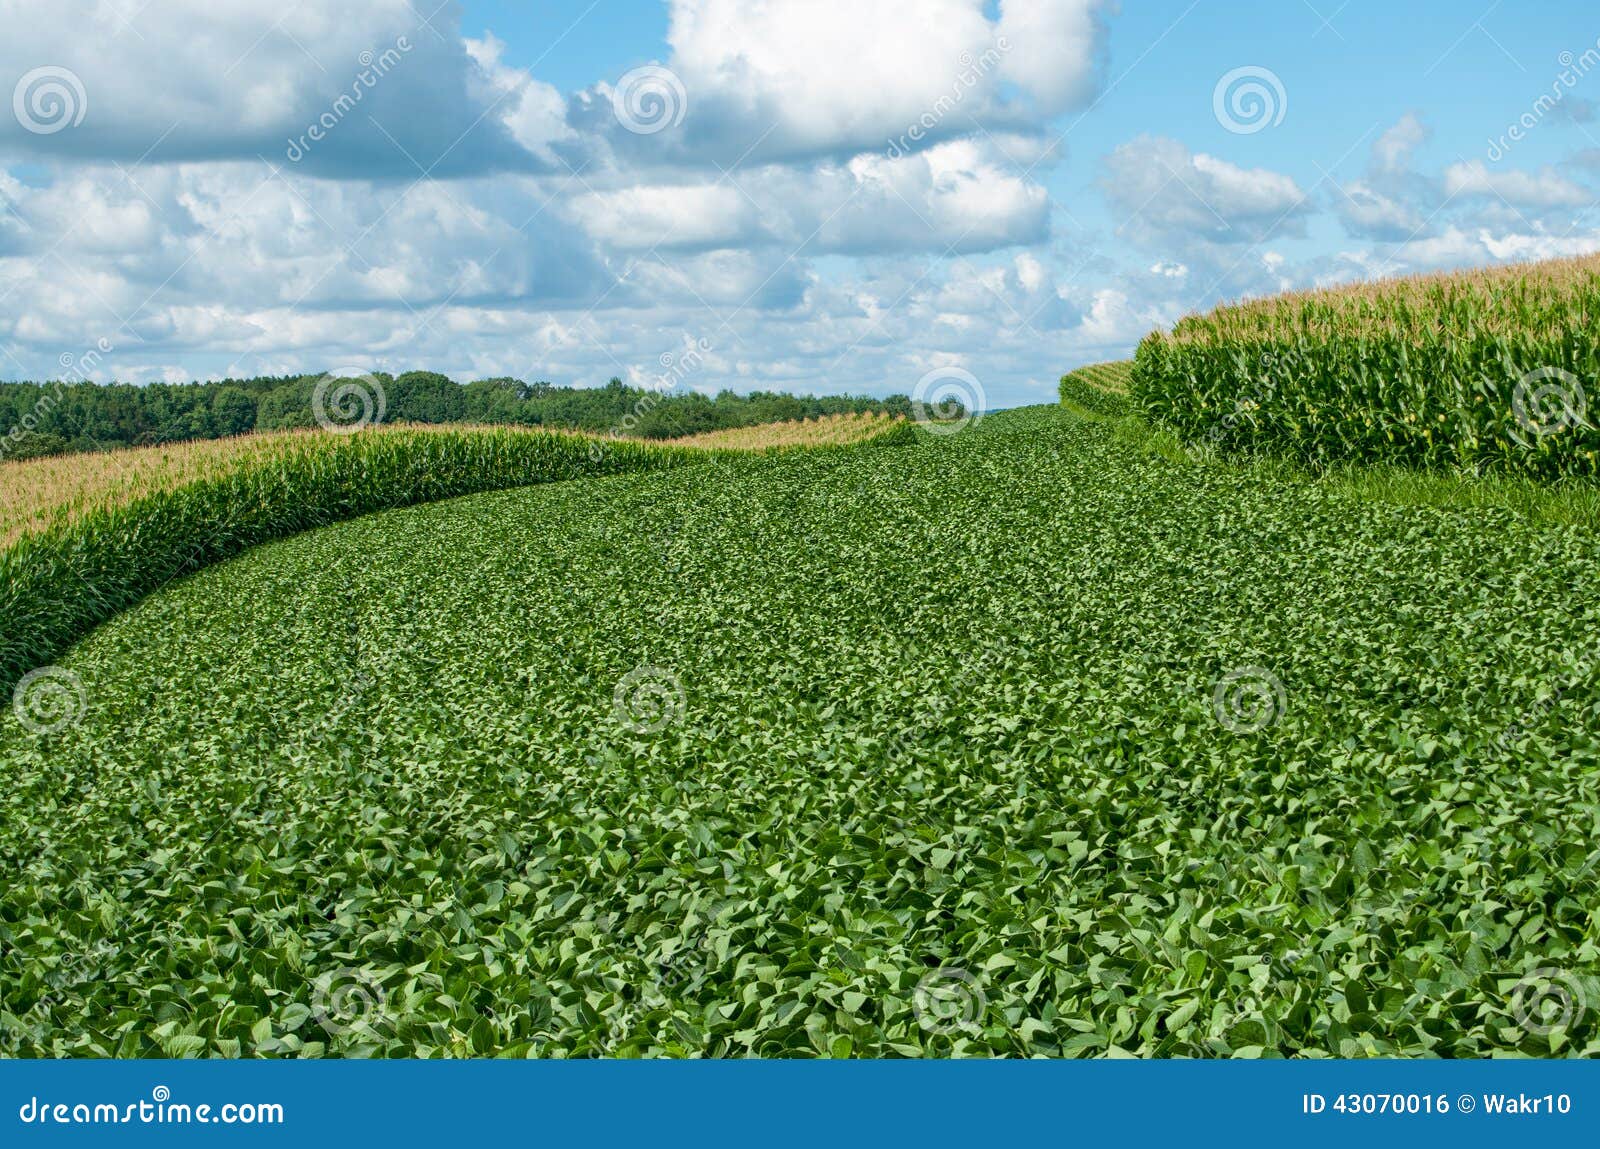 soybean and corn crops